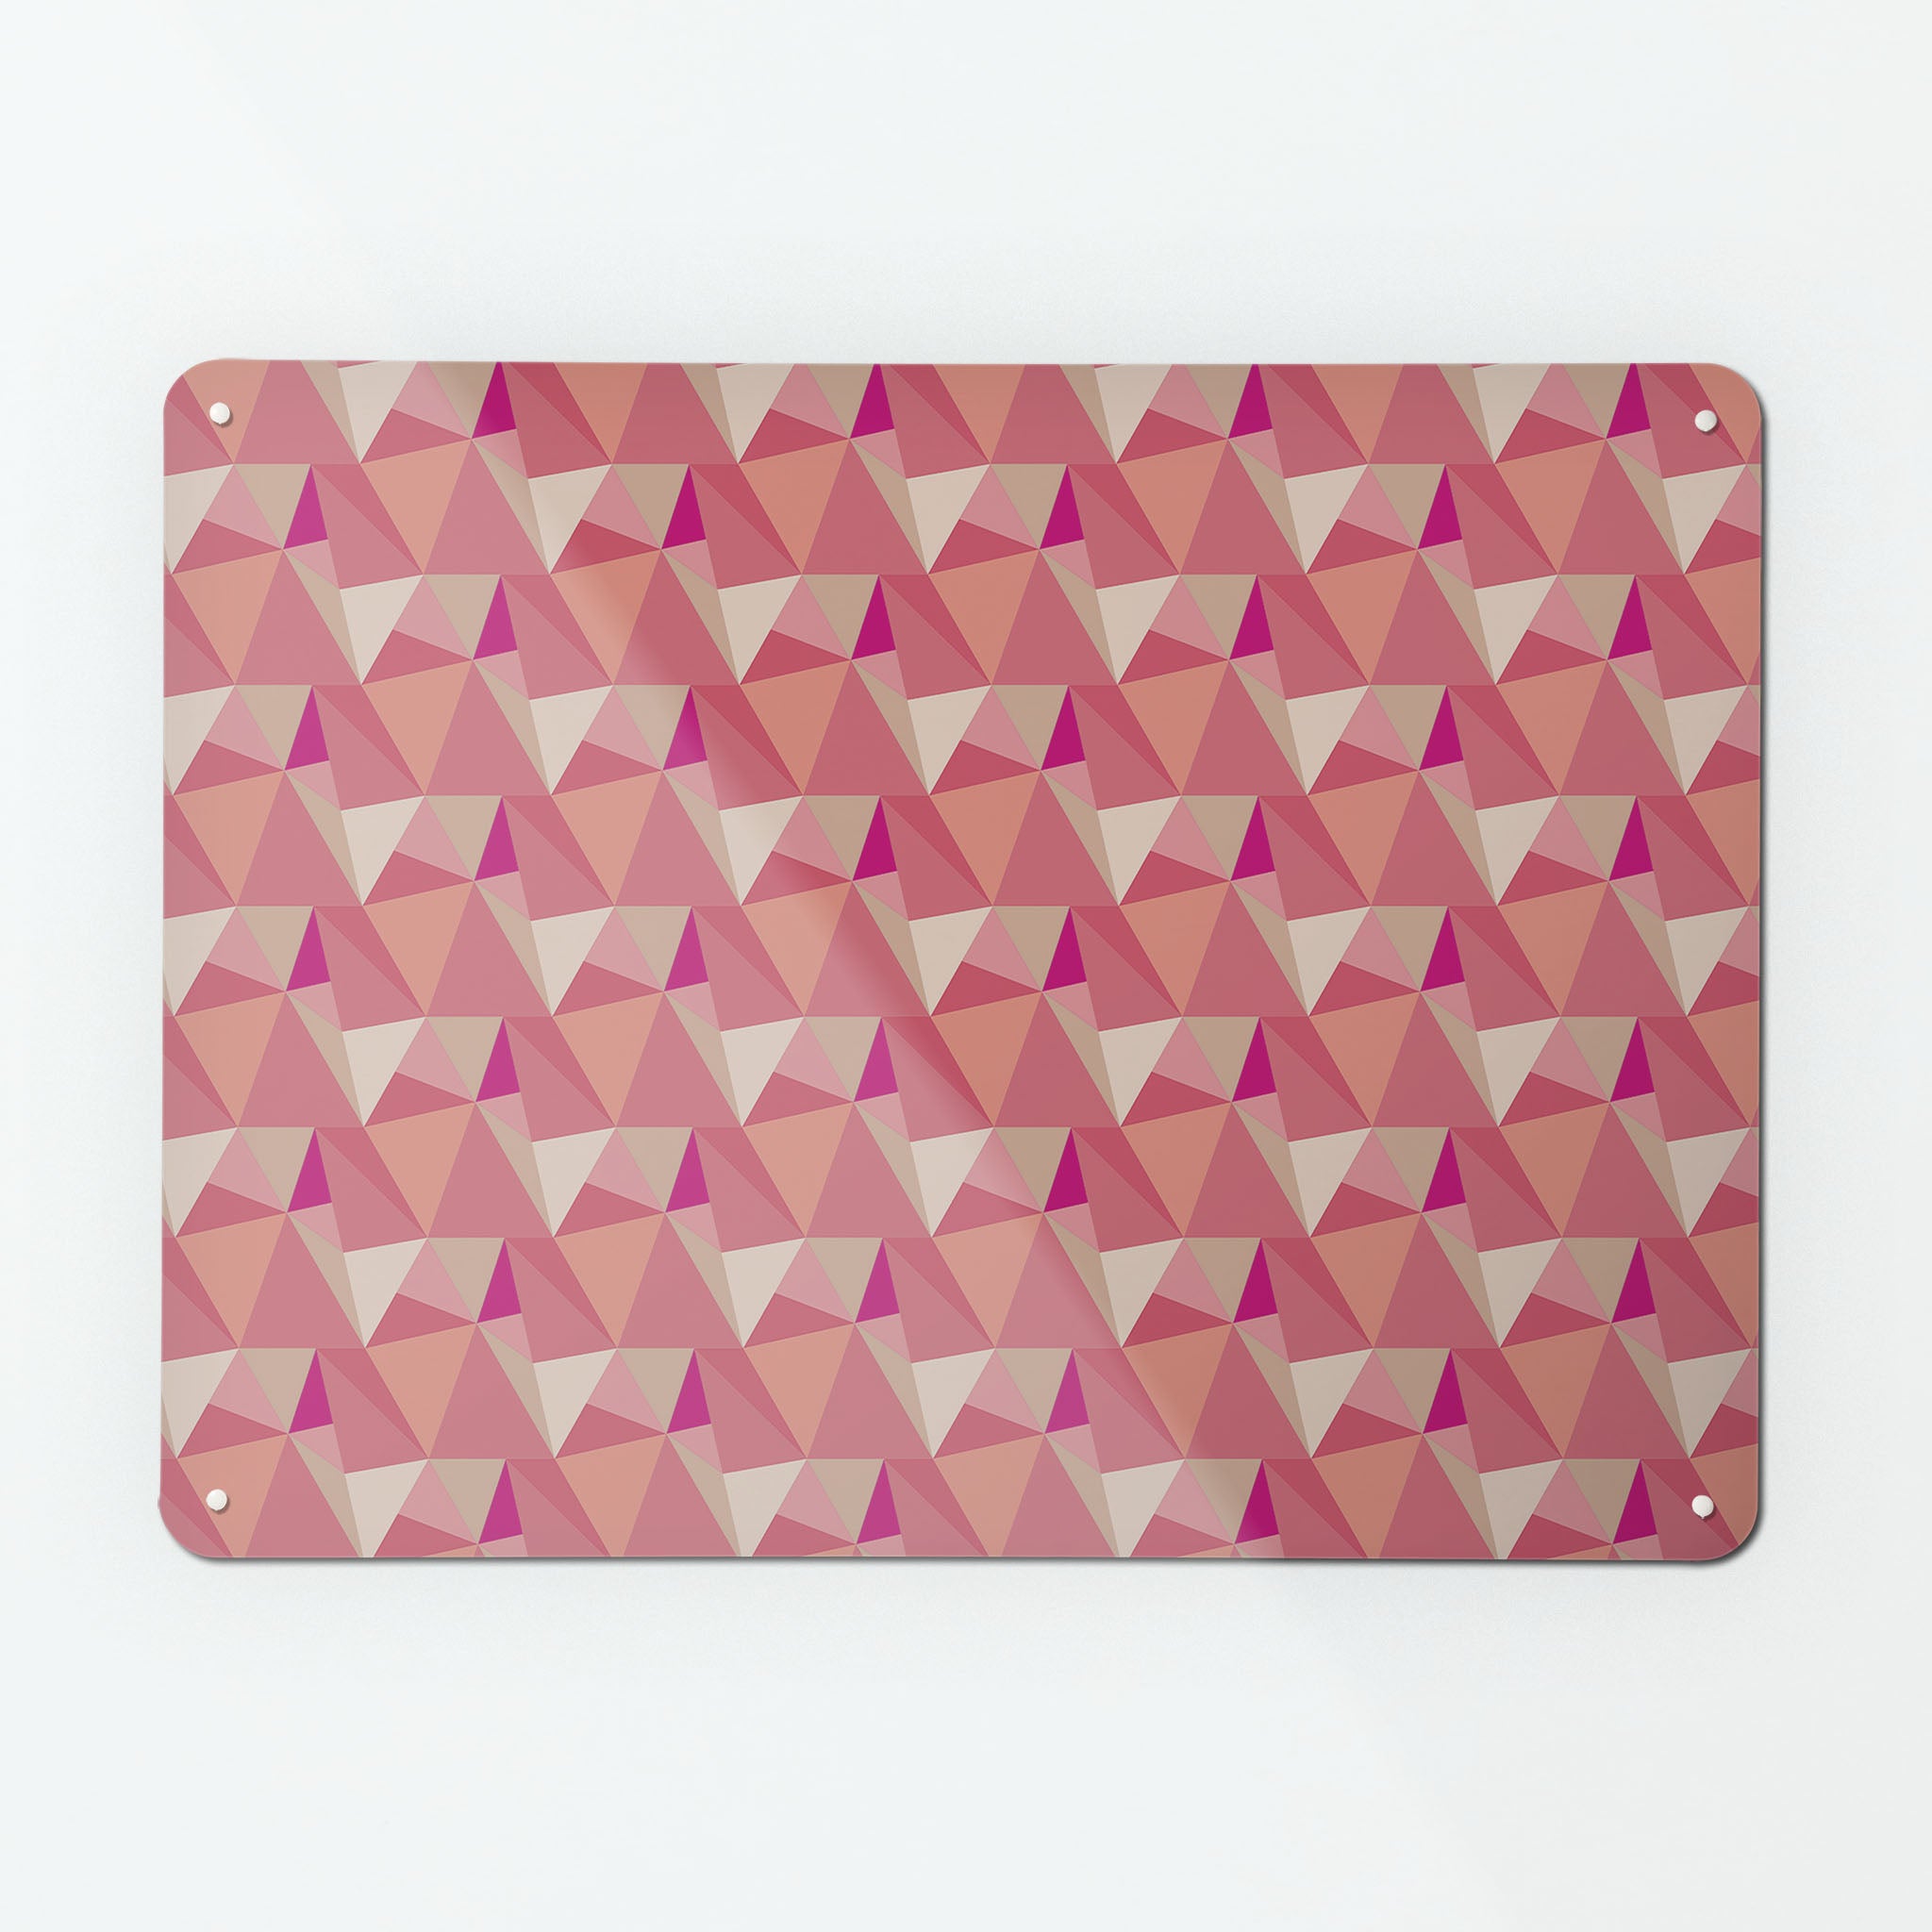 A large magnetic notice board by Beyond the Fridge with a shards geometric design in pink colours